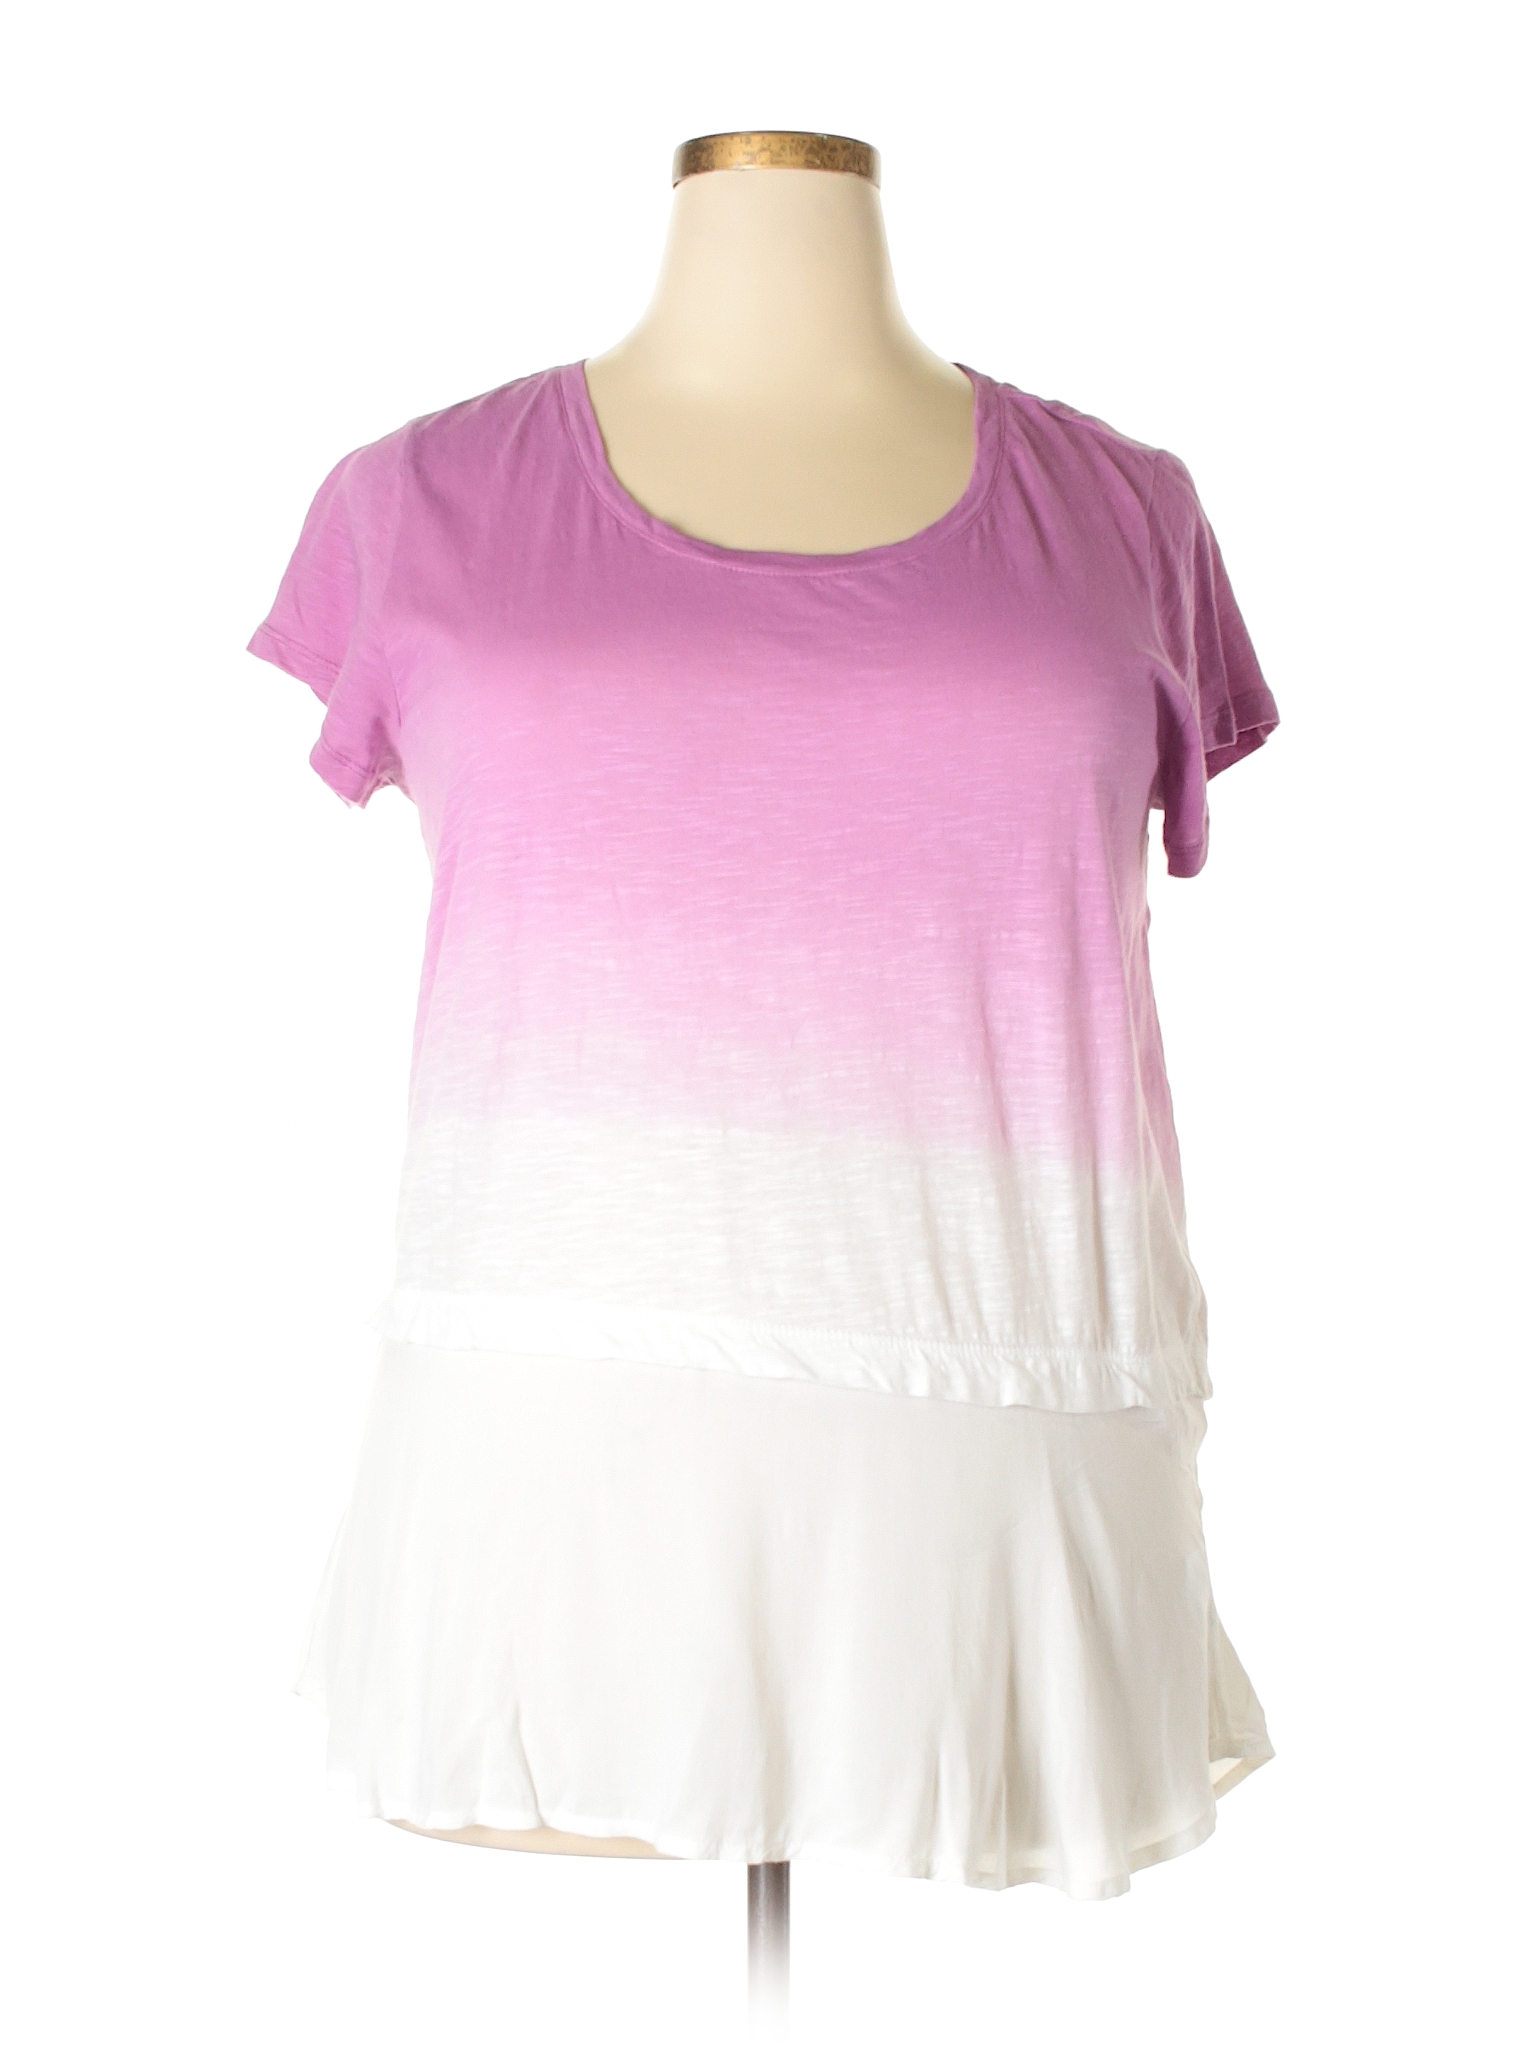 styleco short sleeve t shirt size 12 00 light purple womens tops new with tags